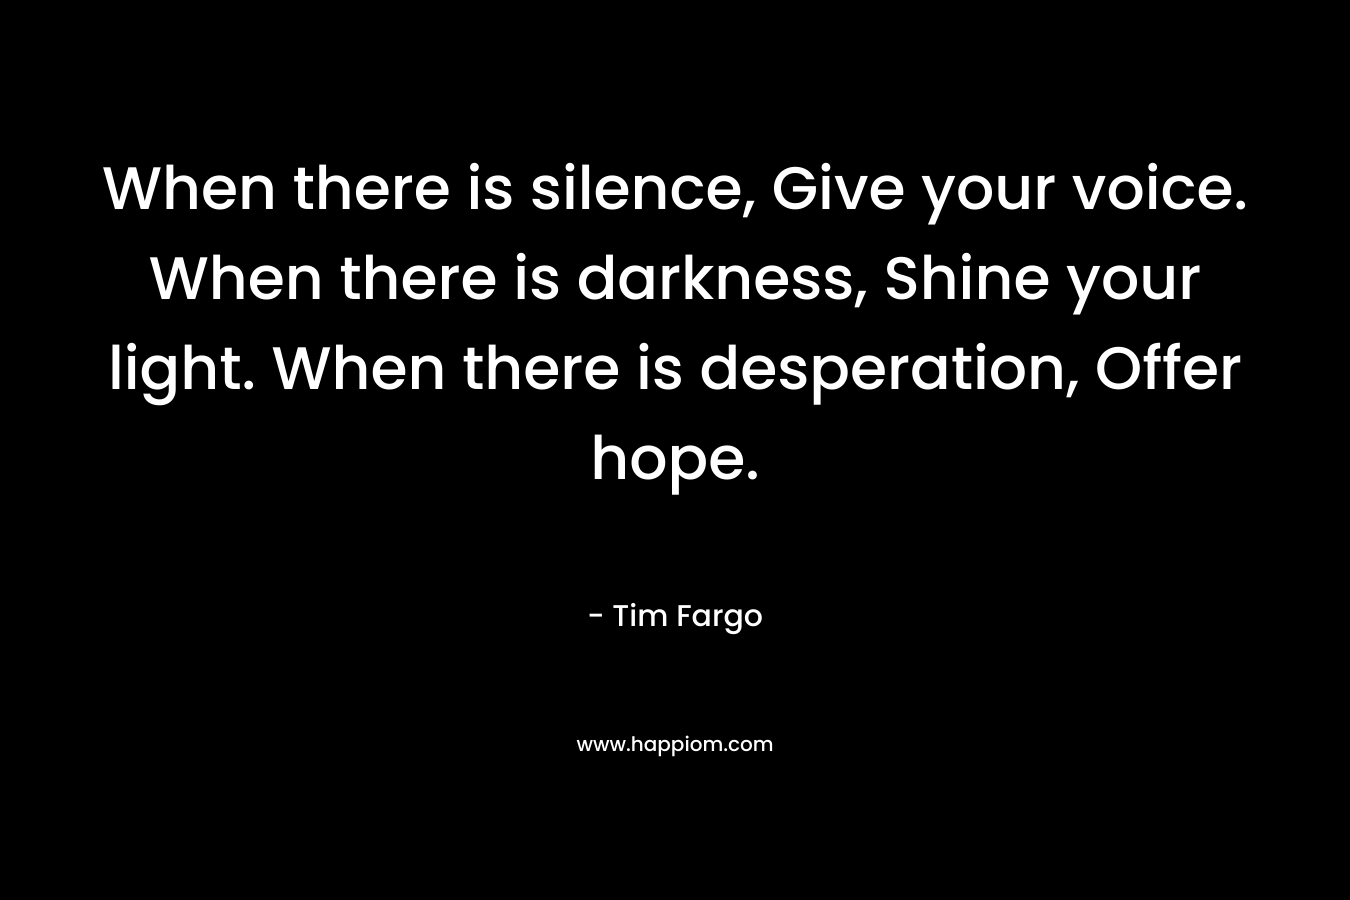 When there is silence, Give your voice. When there is darkness, Shine your light. When there is desperation, Offer hope.